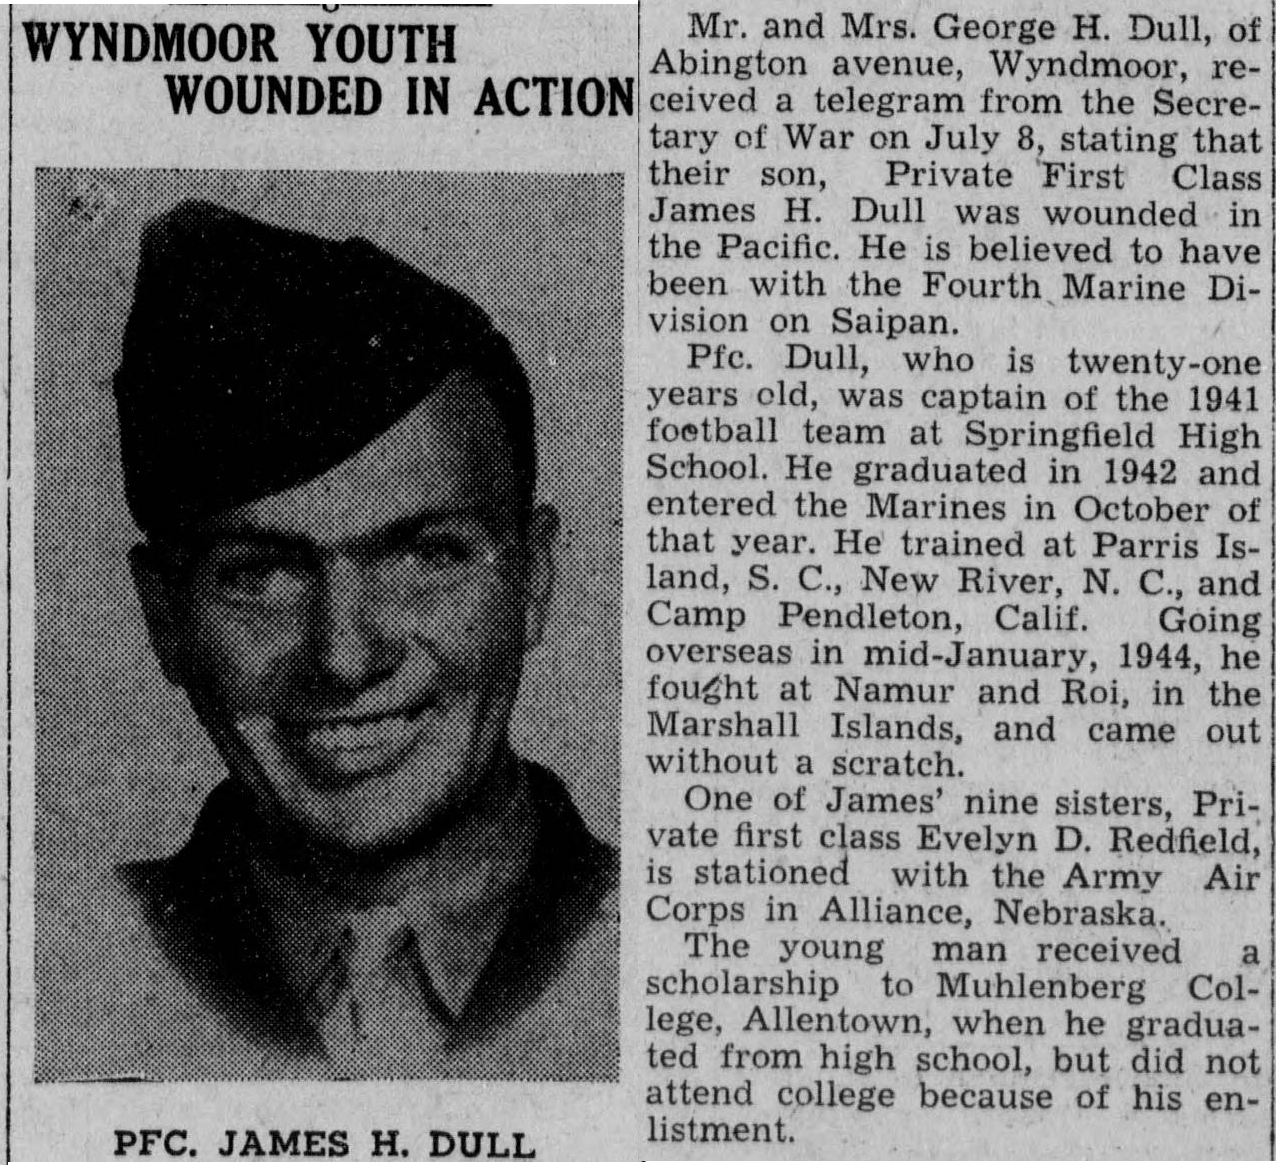 Fortunately, Bud's wounds were not serious, and he quickly returned to duty. Article from the Ambler Gazette (Ambler, PA) 27 July 1944.